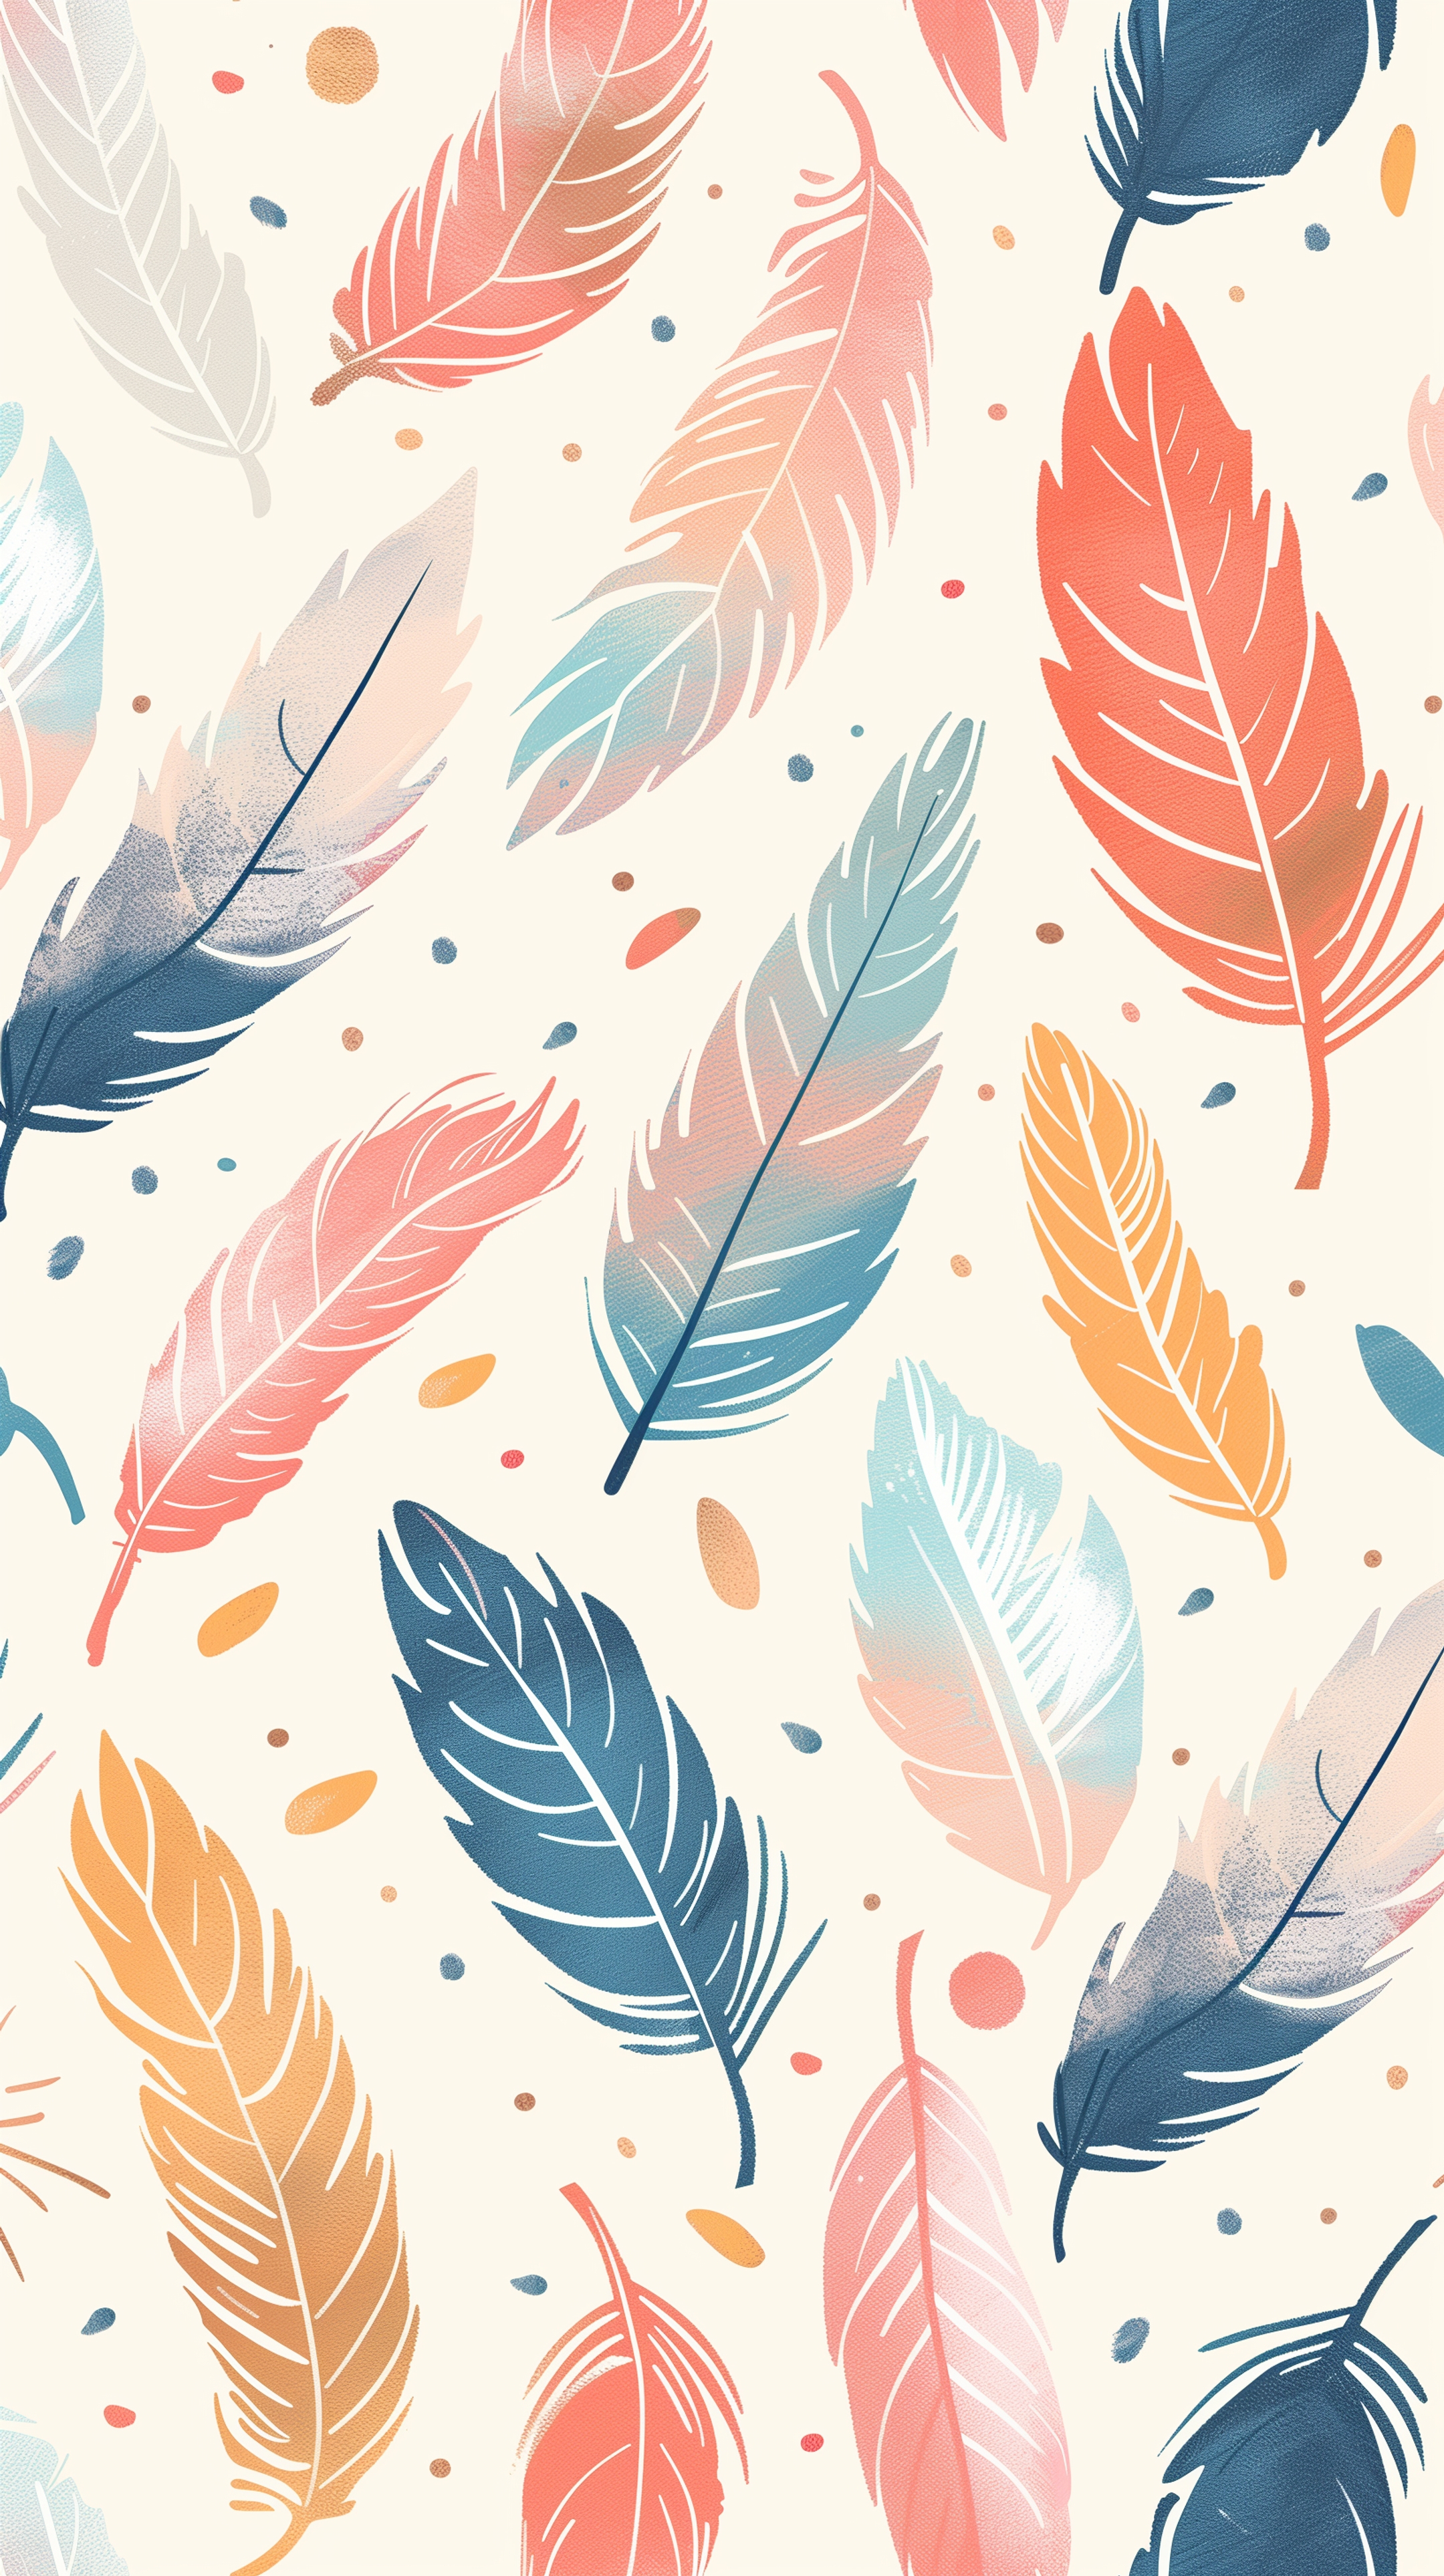 Colorful Feathers Design for Kids Wallpaper[385f1366577146a2b959]